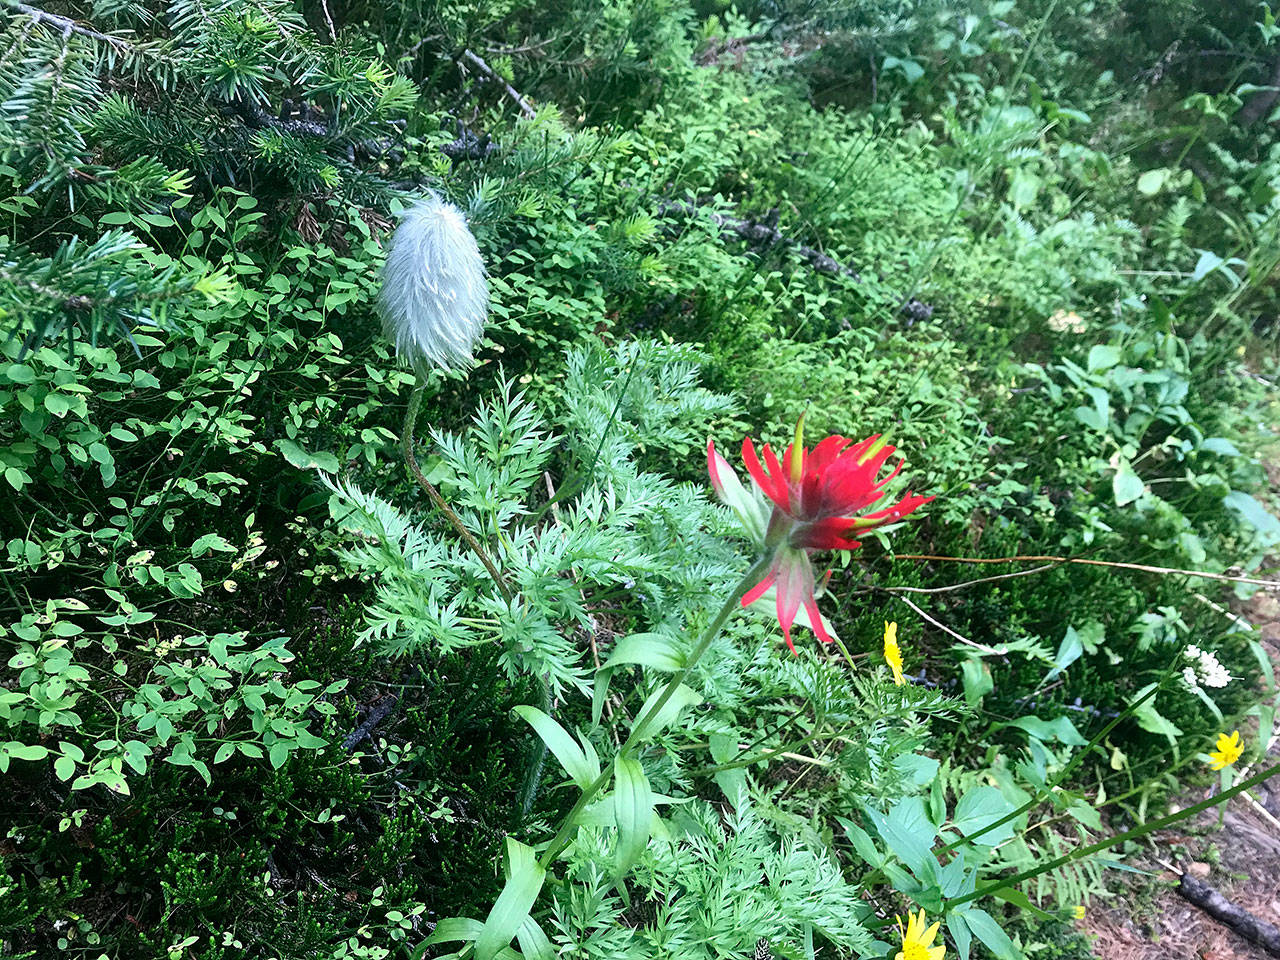 A Western pasqueflower, left, and an Indian paintbrush